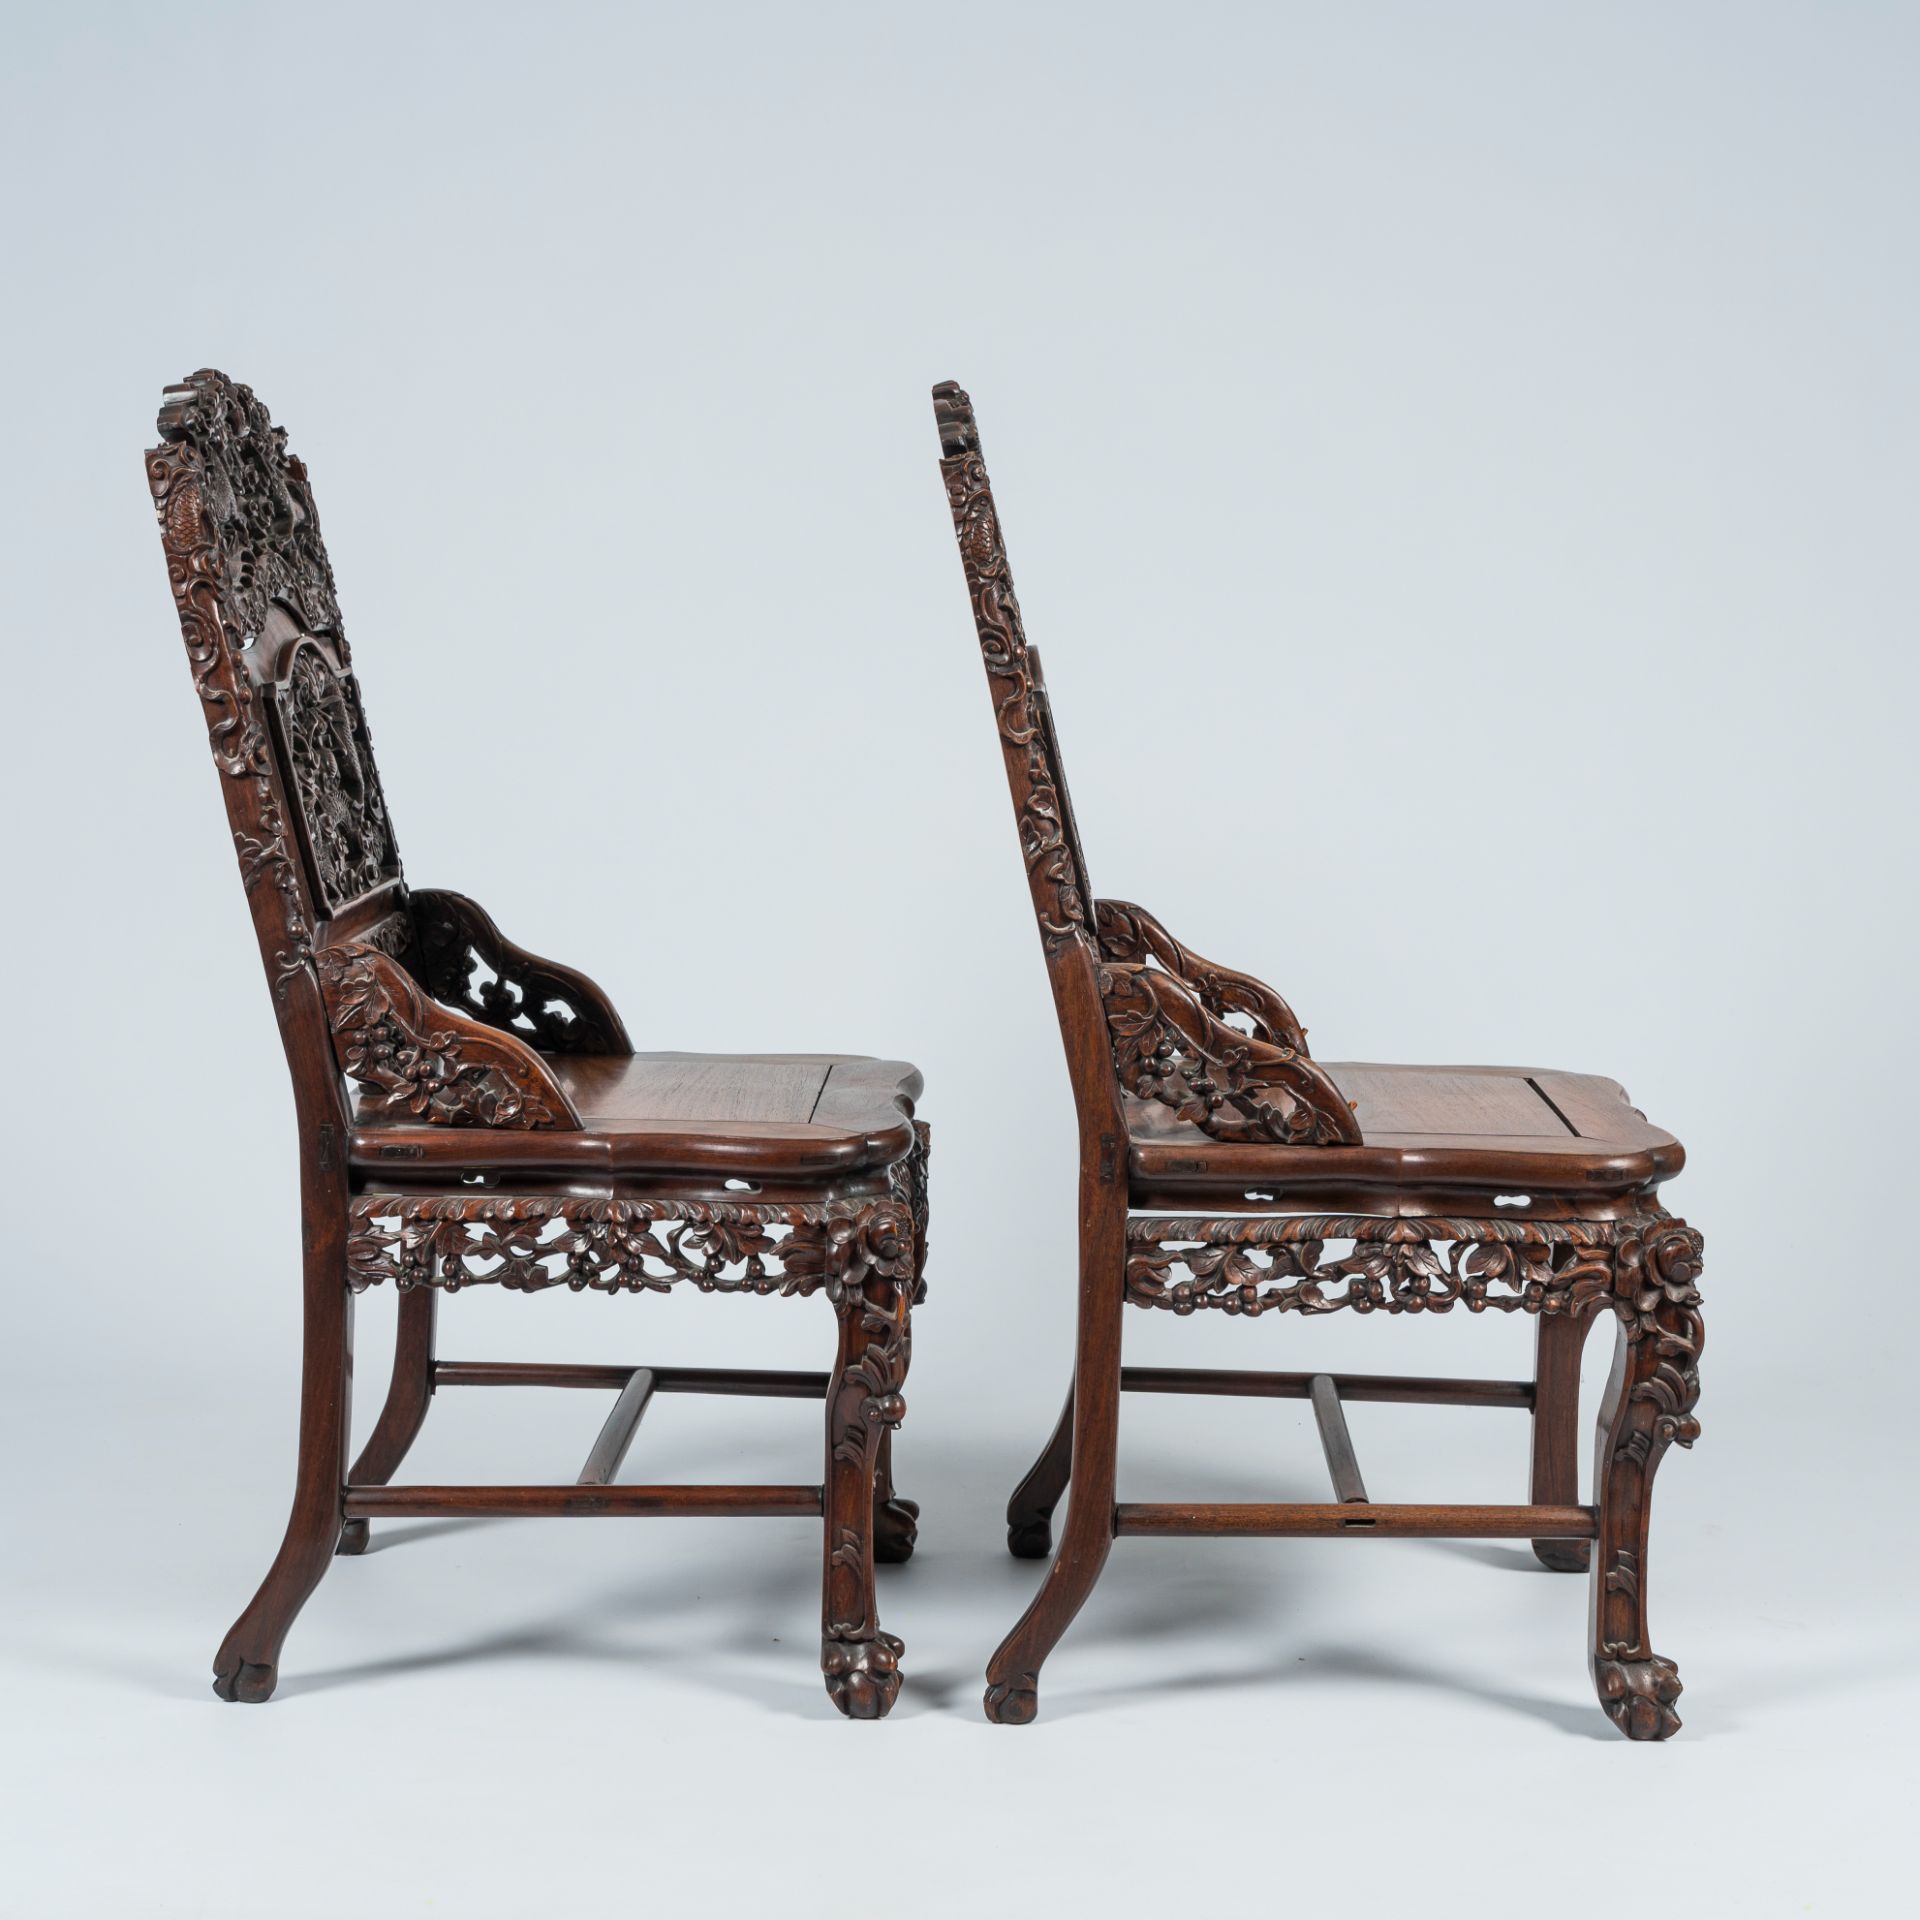 A pair of Chinese carved hardwood 'dragon' chairs, 19th C. - Image 5 of 10